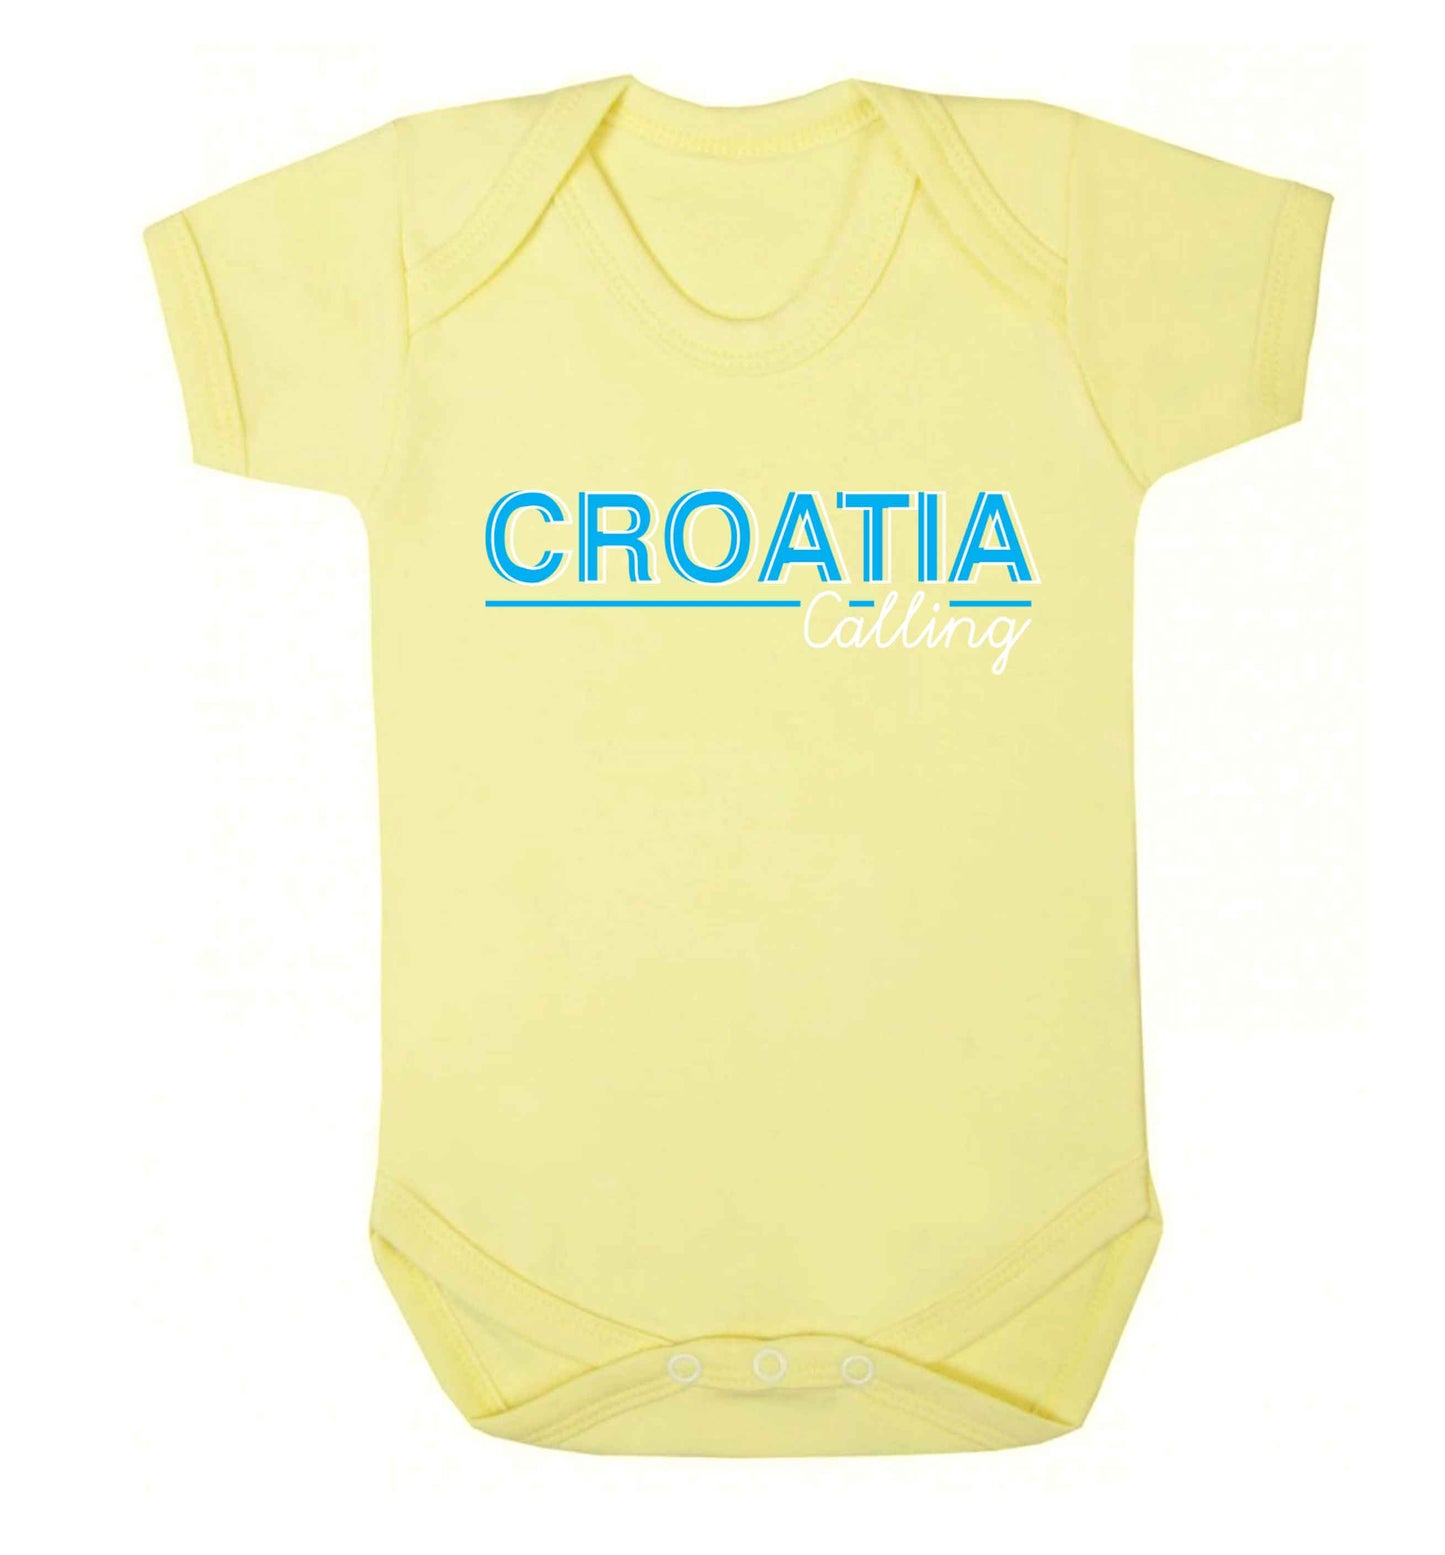 Croatia calling Baby Vest pale yellow 18-24 months